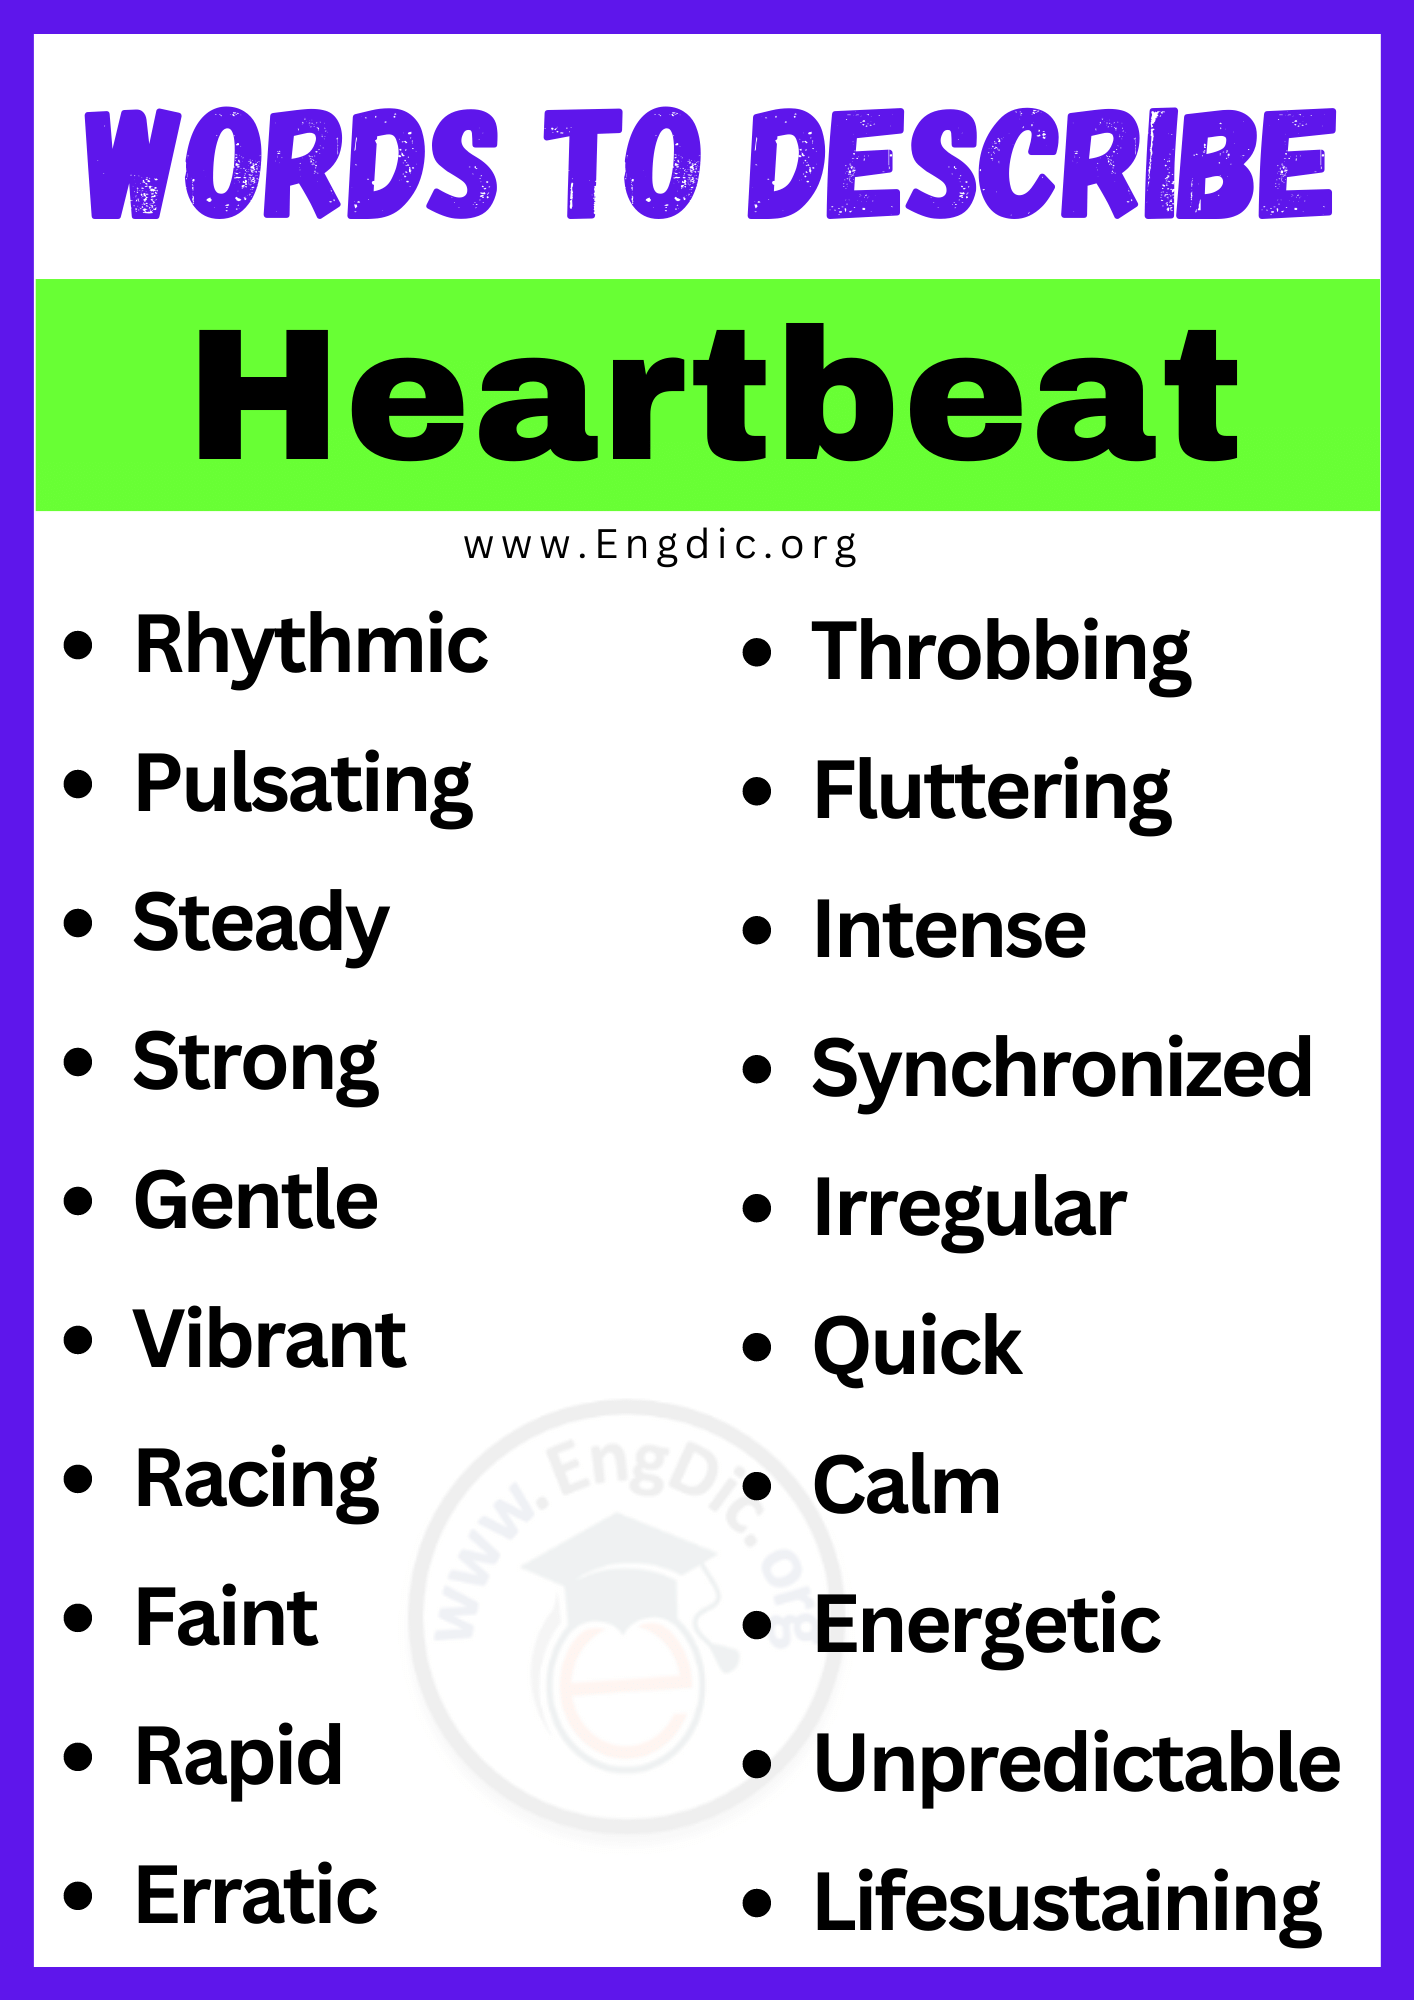 Words to Describe Heartbeat